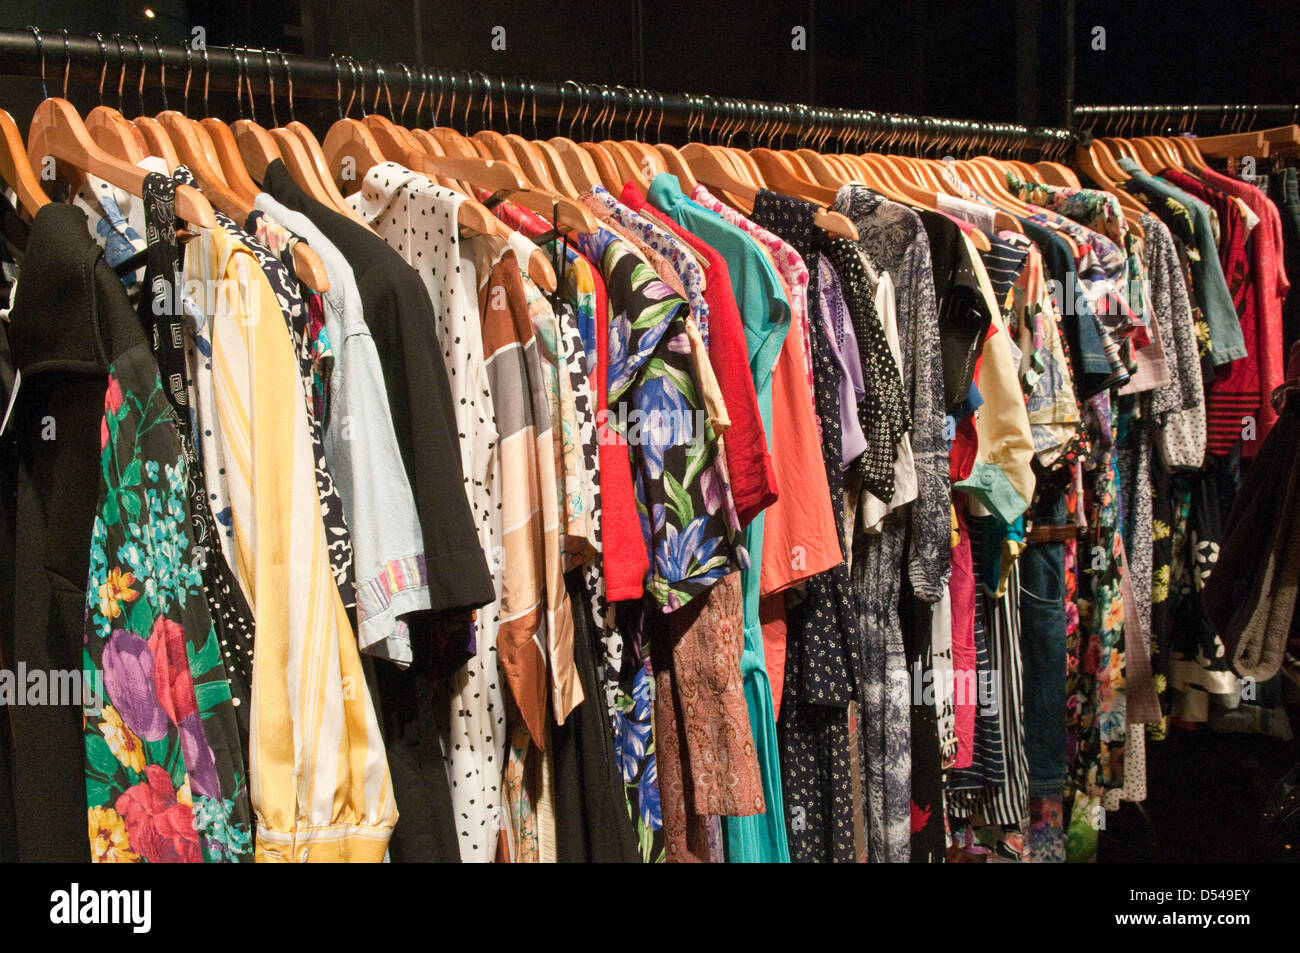 A Long Clothes Rail Packed With Colurful Patterned Second Hand and Amazing Vintage 2Nd Hand Clothing you should know